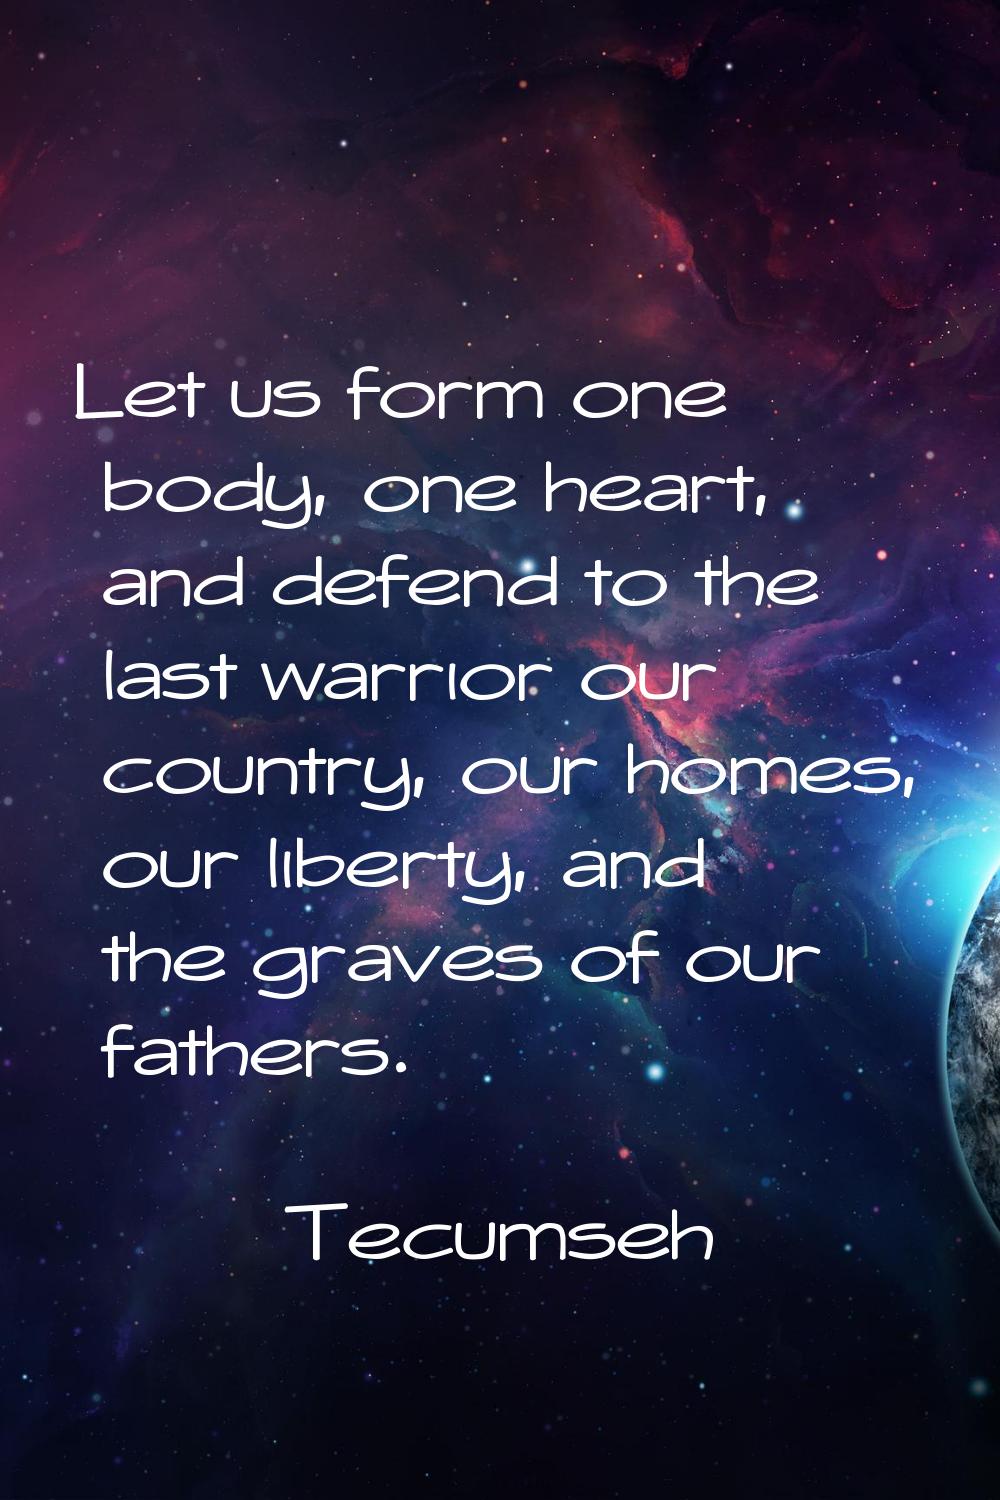 Let us form one body, one heart, and defend to the last warrior our country, our homes, our liberty